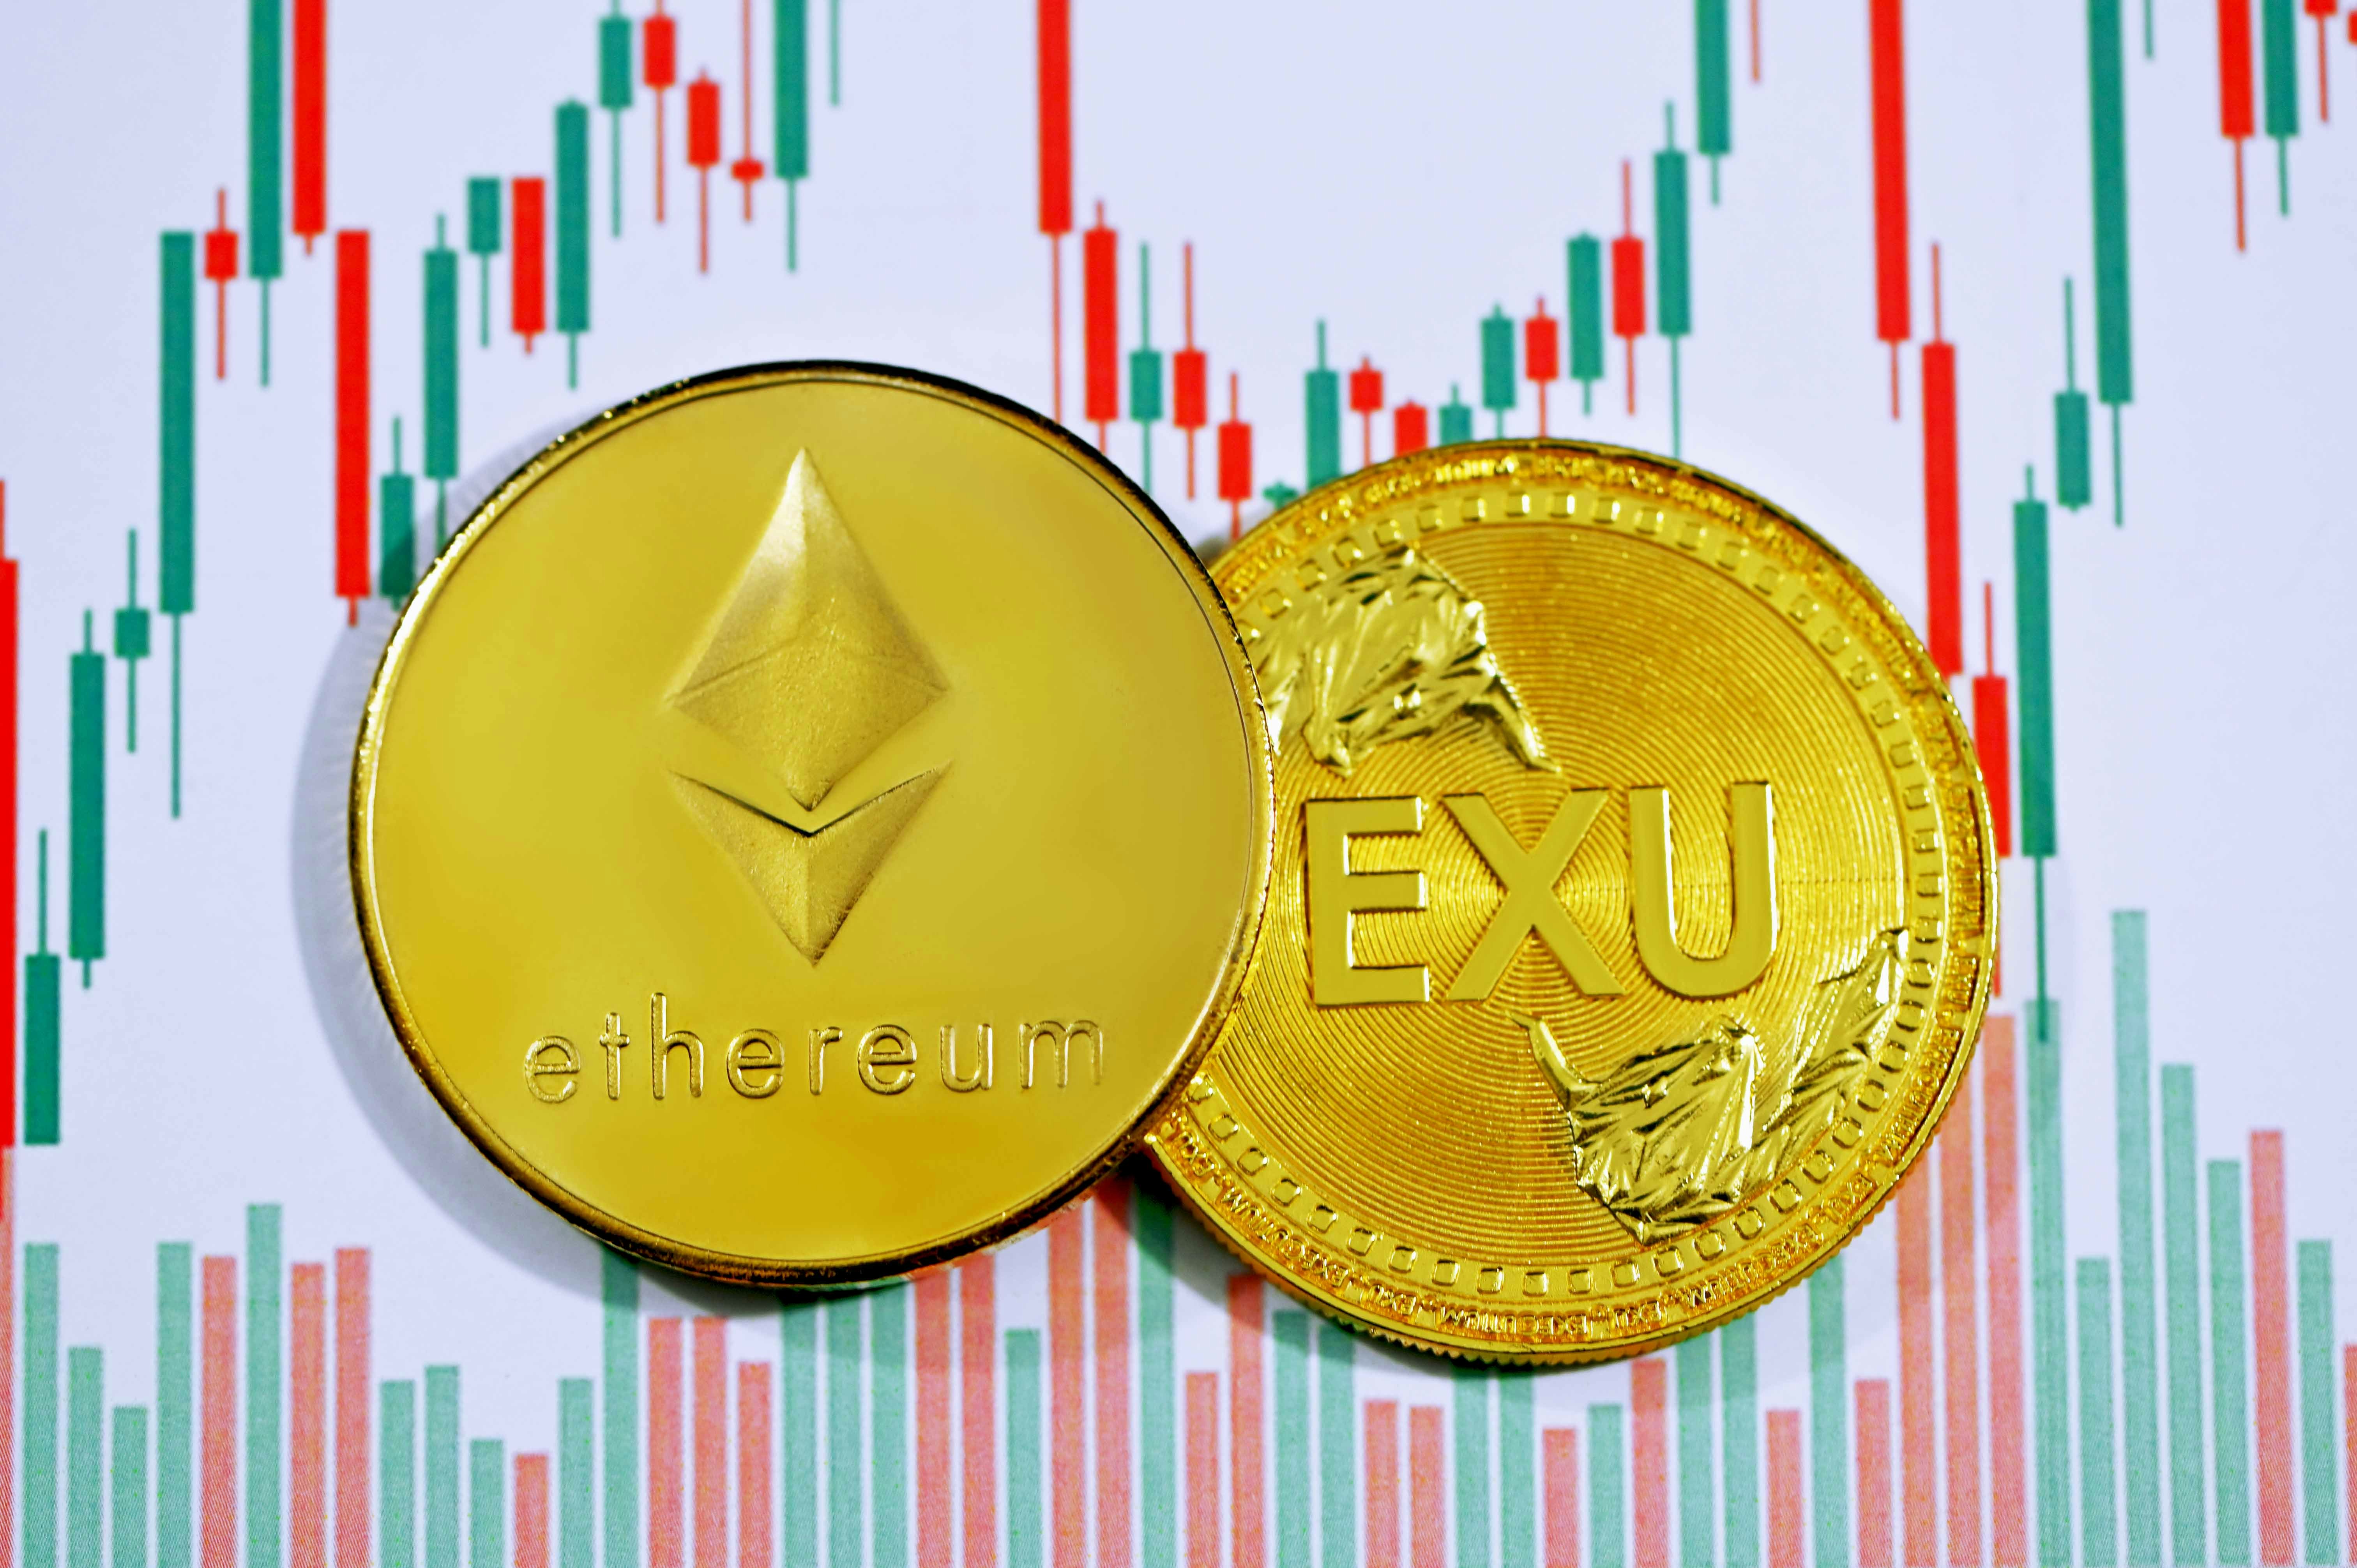 Ethereum coin and EXU coin on top of a trading chart